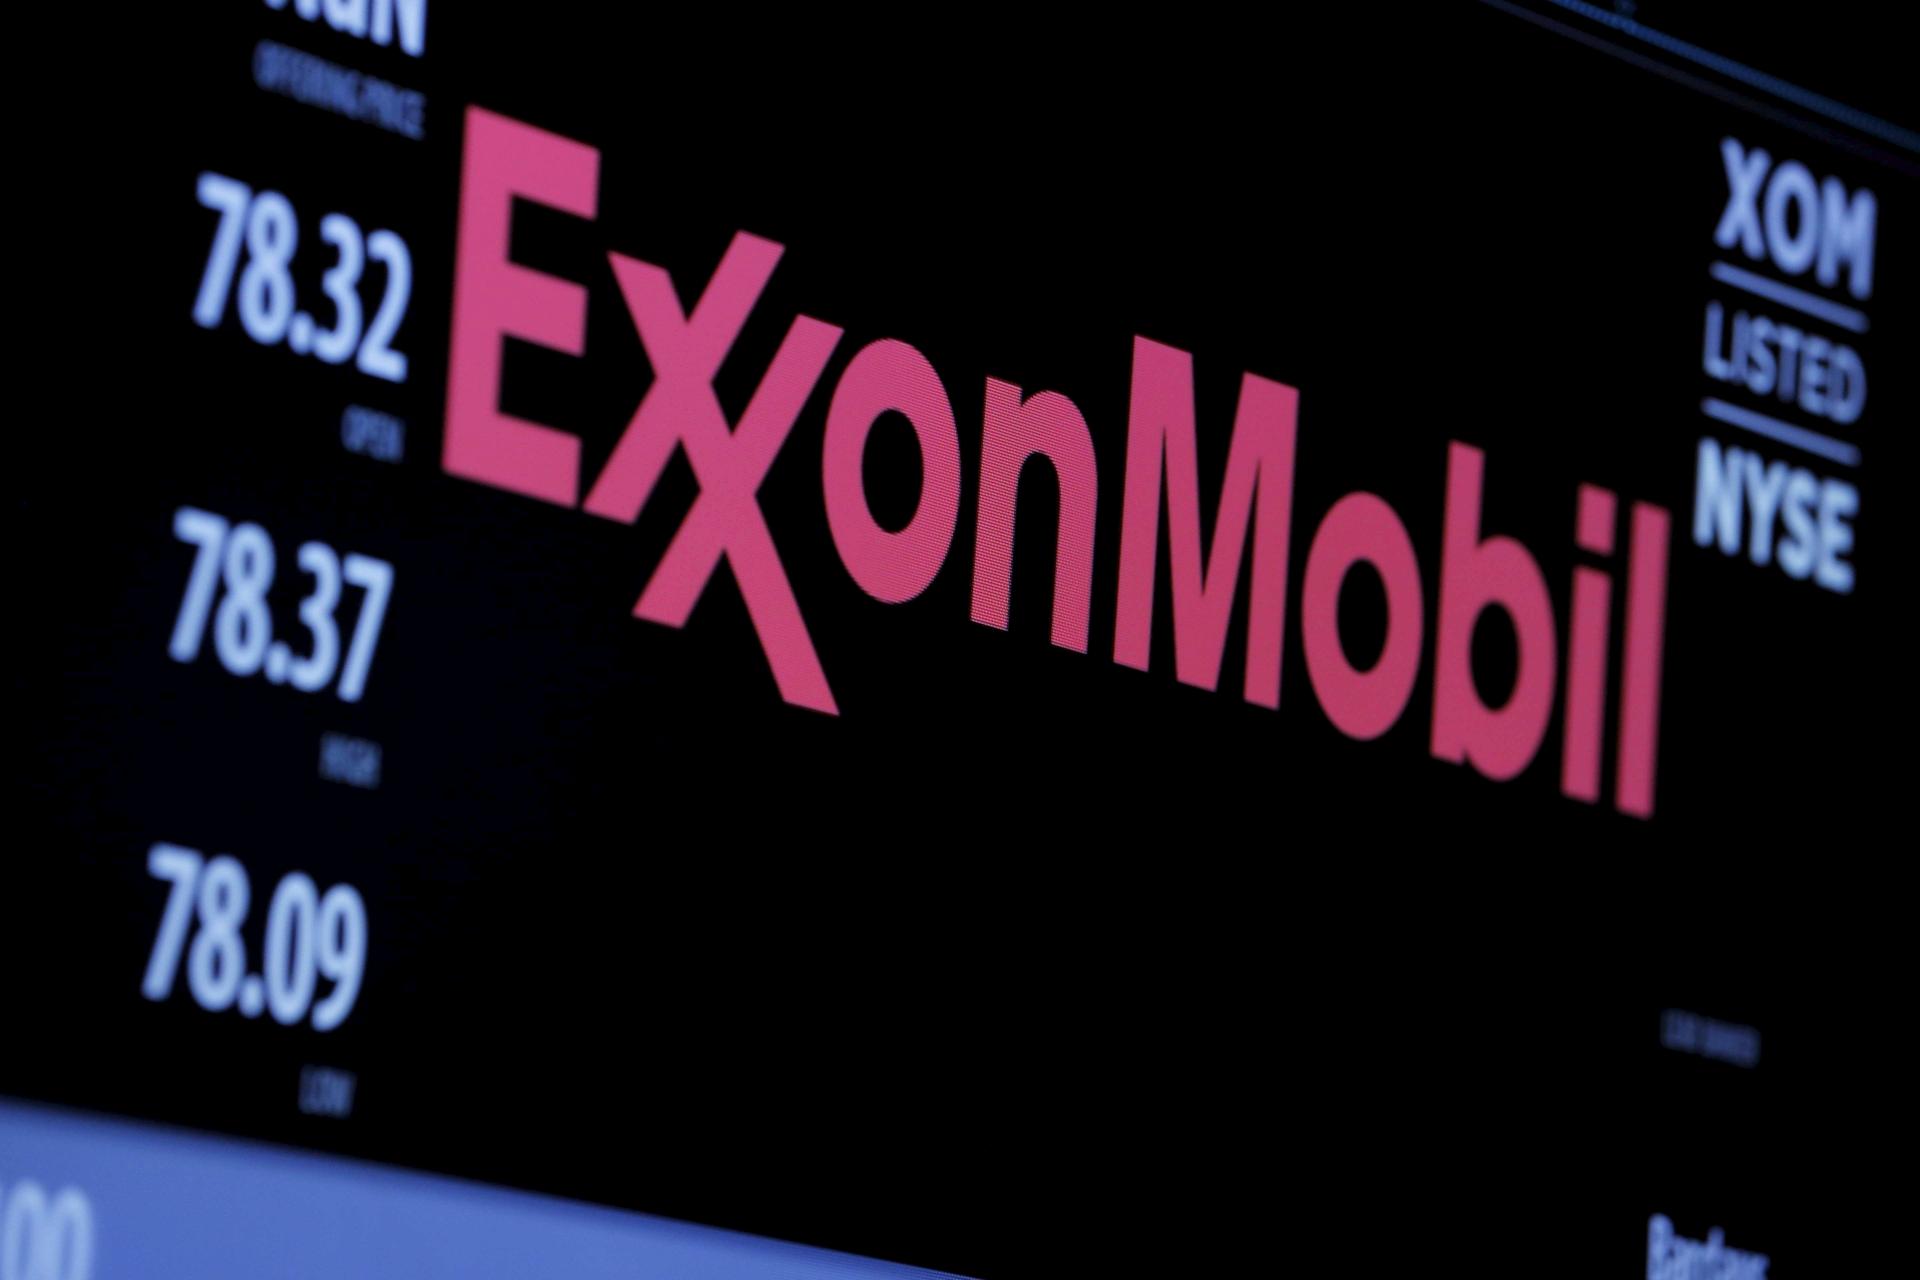 Former Exxon Mobil Corp. CEO Rex Tillerson was an outspoken critic of the rule designed to prevent bribery. 